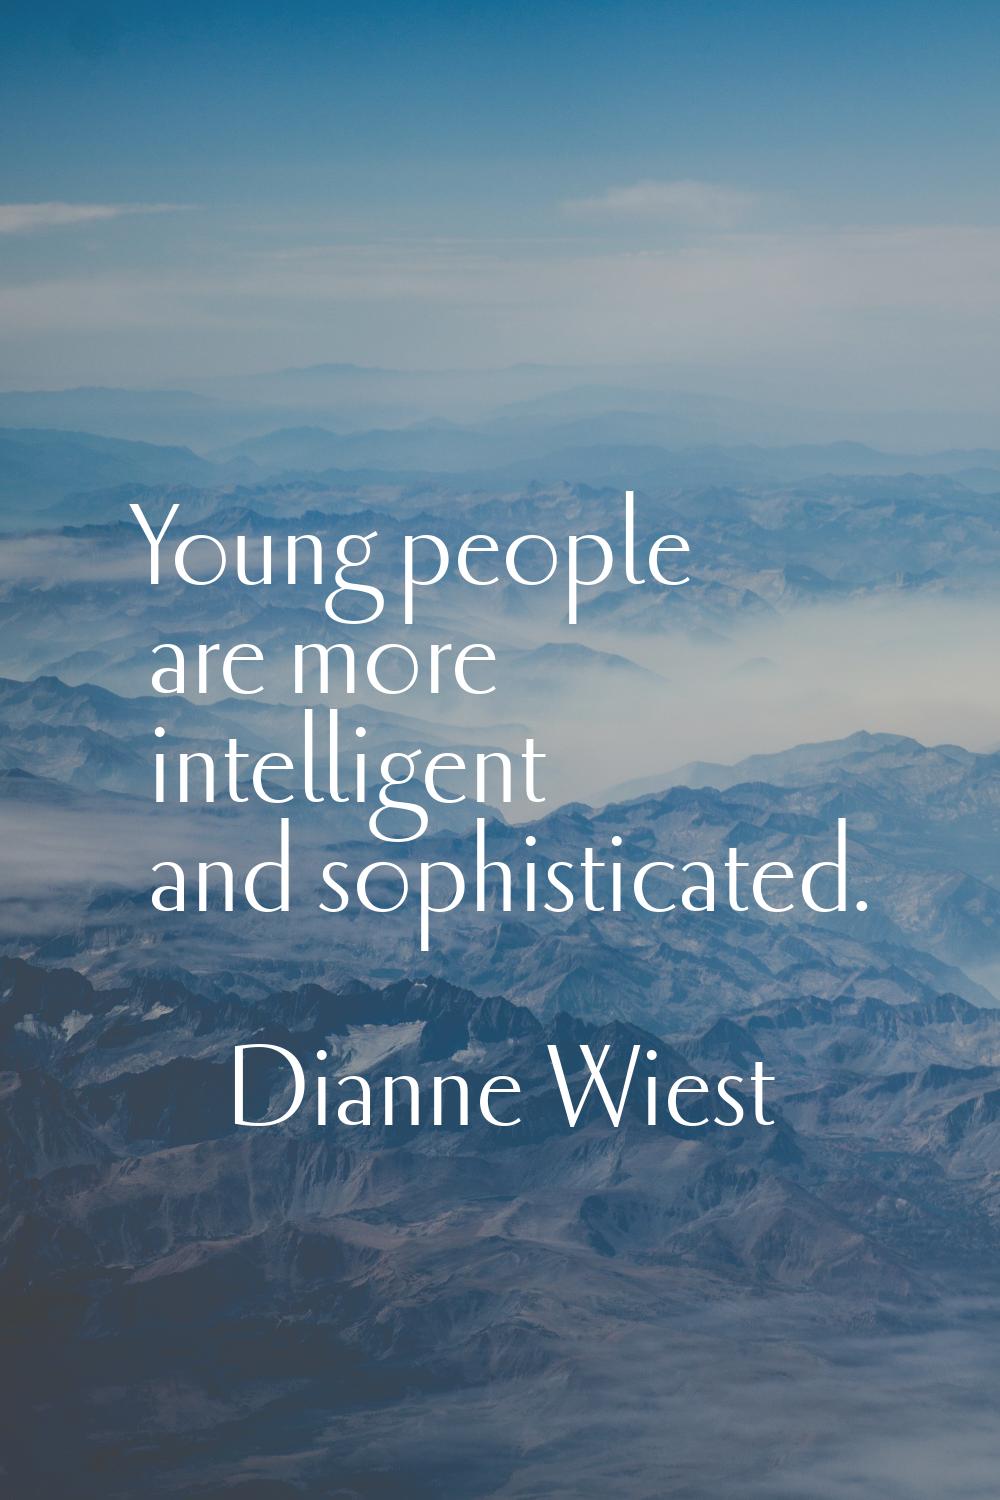 Young people are more intelligent and sophisticated.